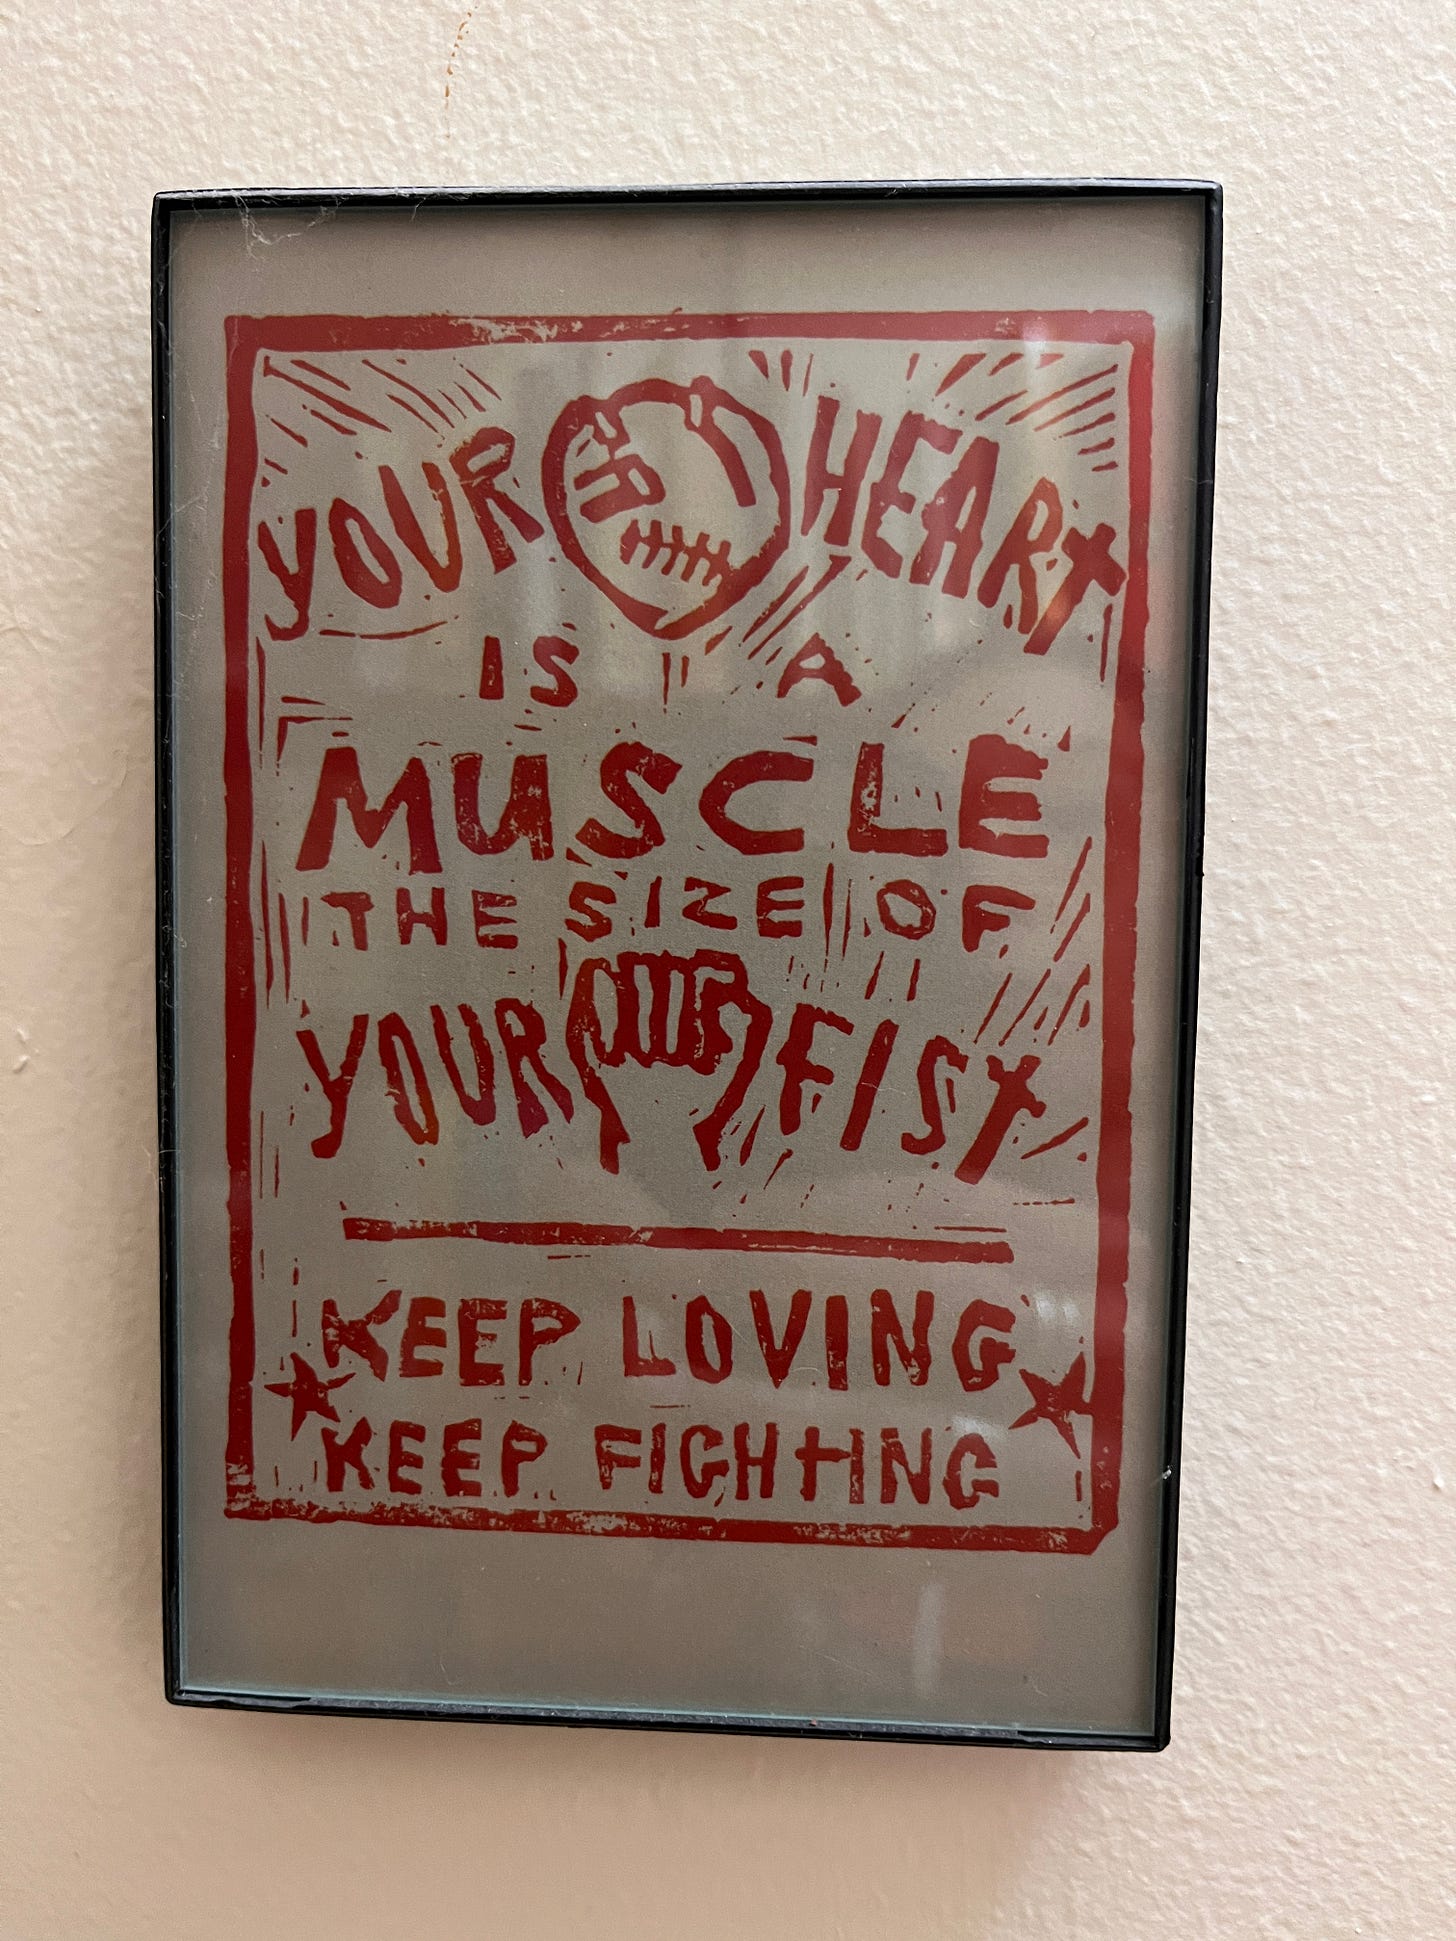 A red woodcut image with a fist and heart and the slogan "your heart is a muscle the size of your fist; keep loving; keep fighting."